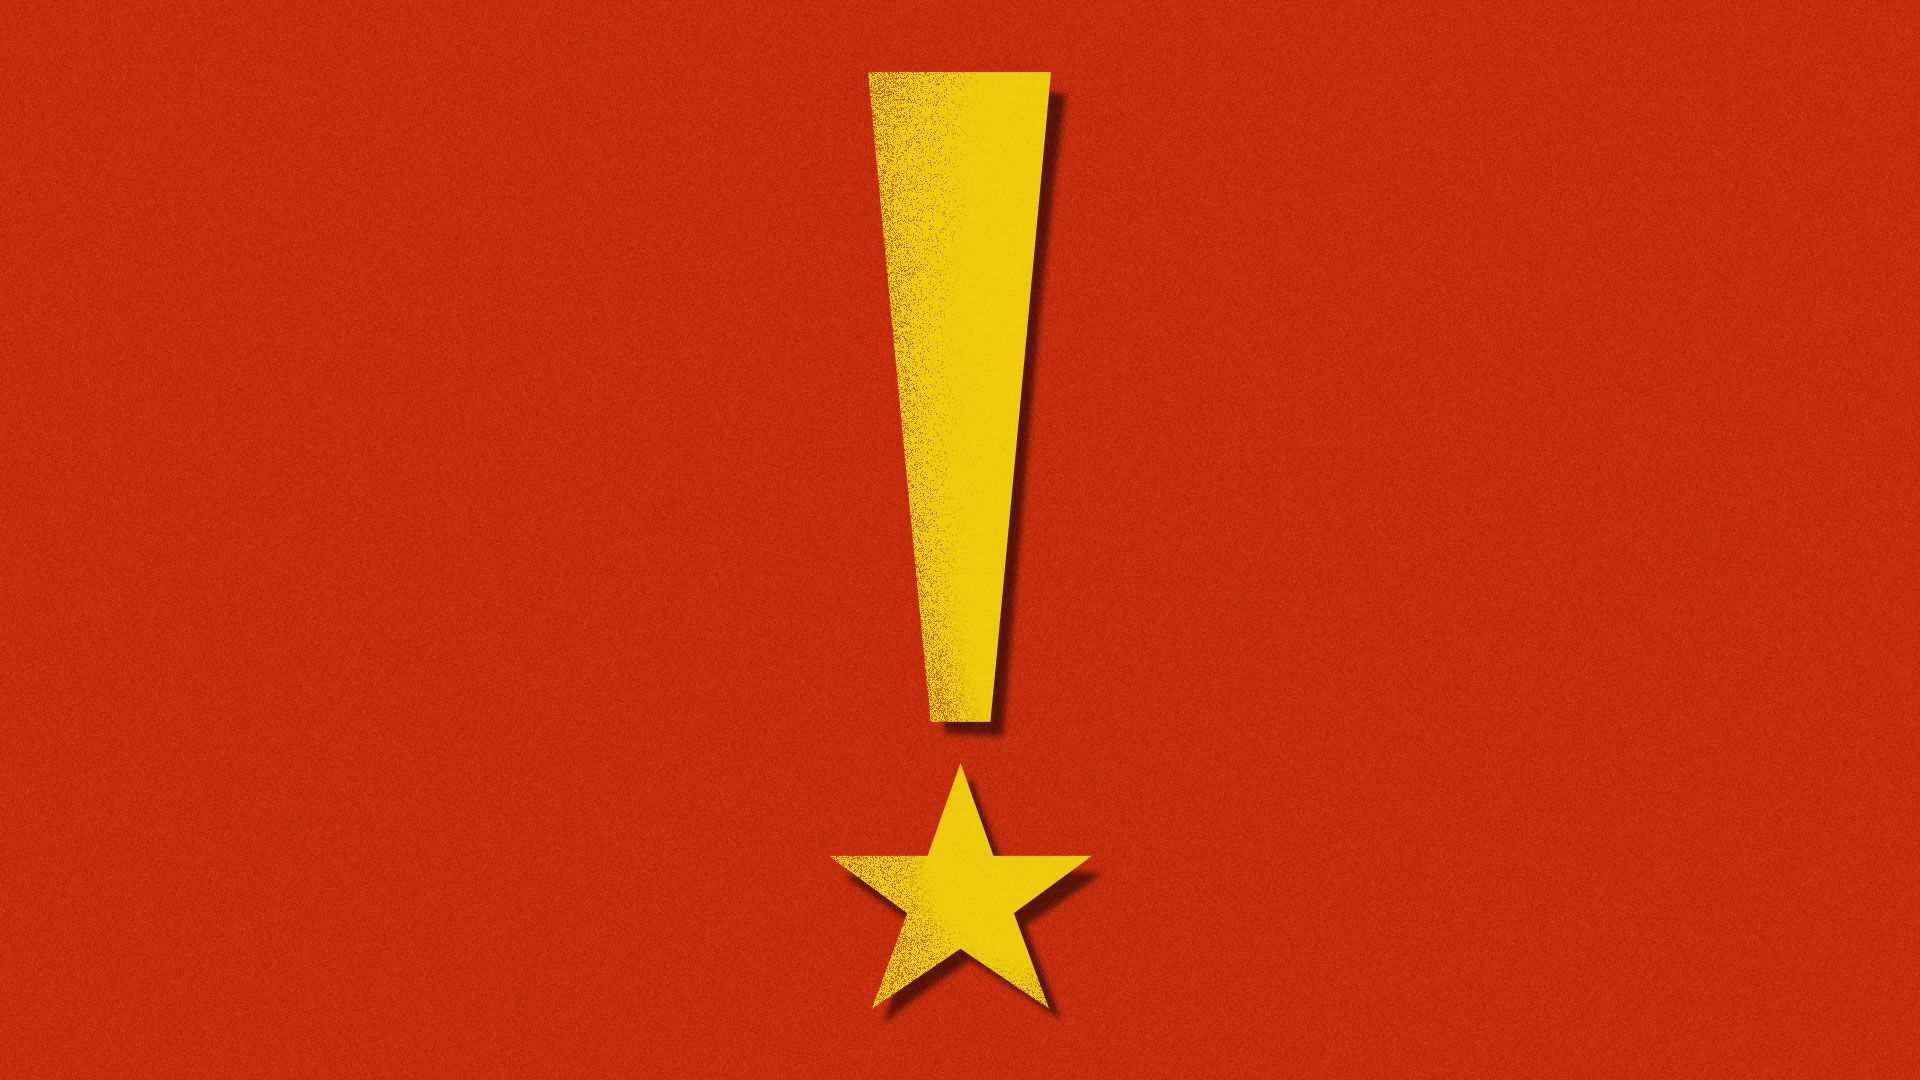 Illustration of exclamation point with a Chinese star